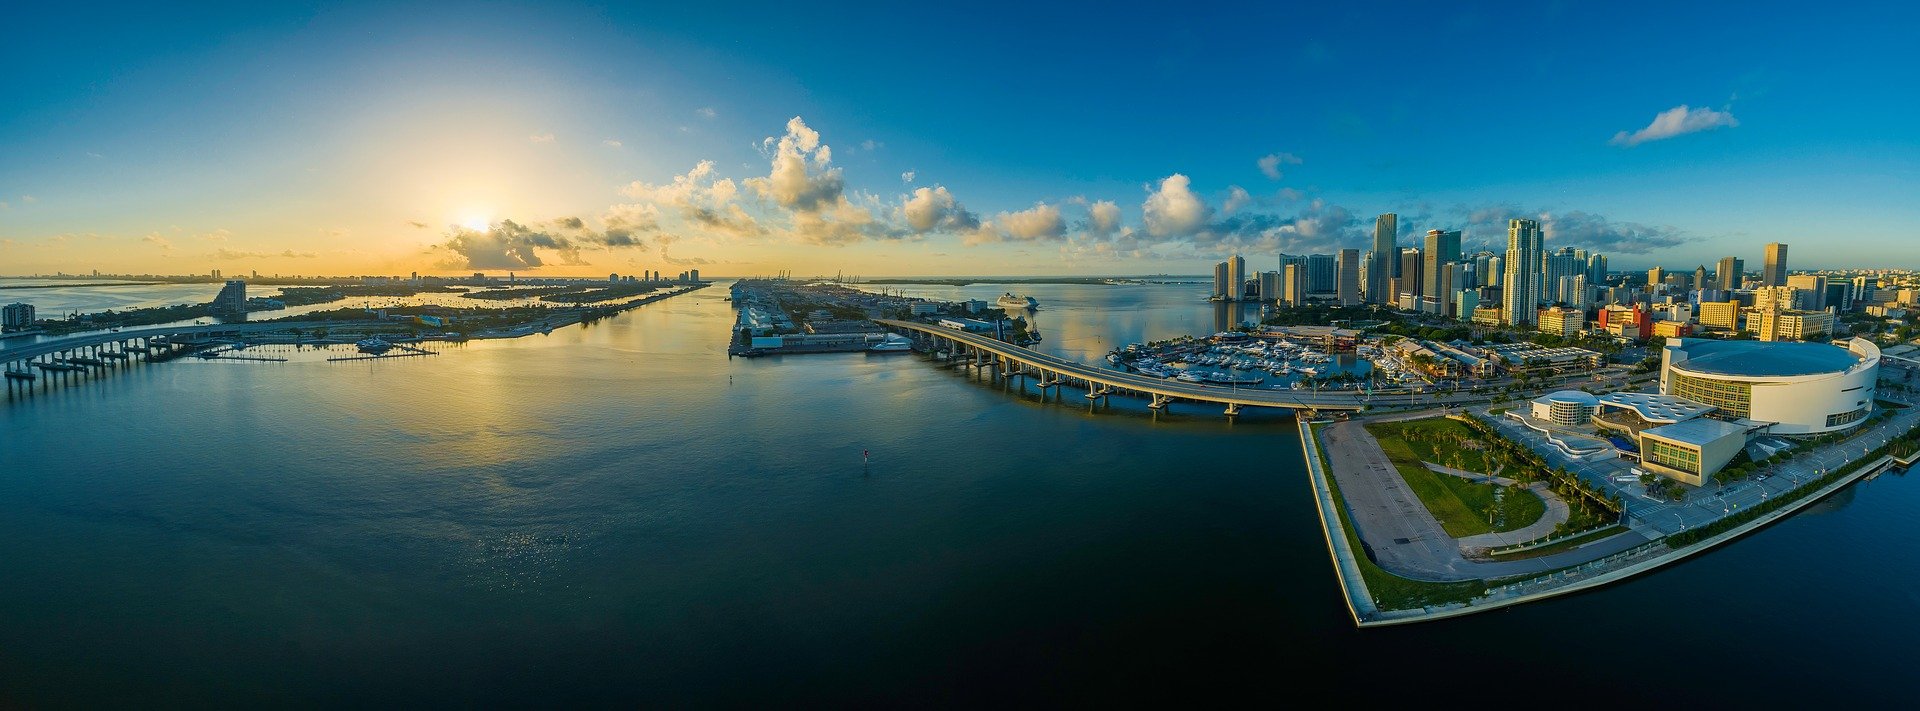 Greater-Downtown-Miami.jpg